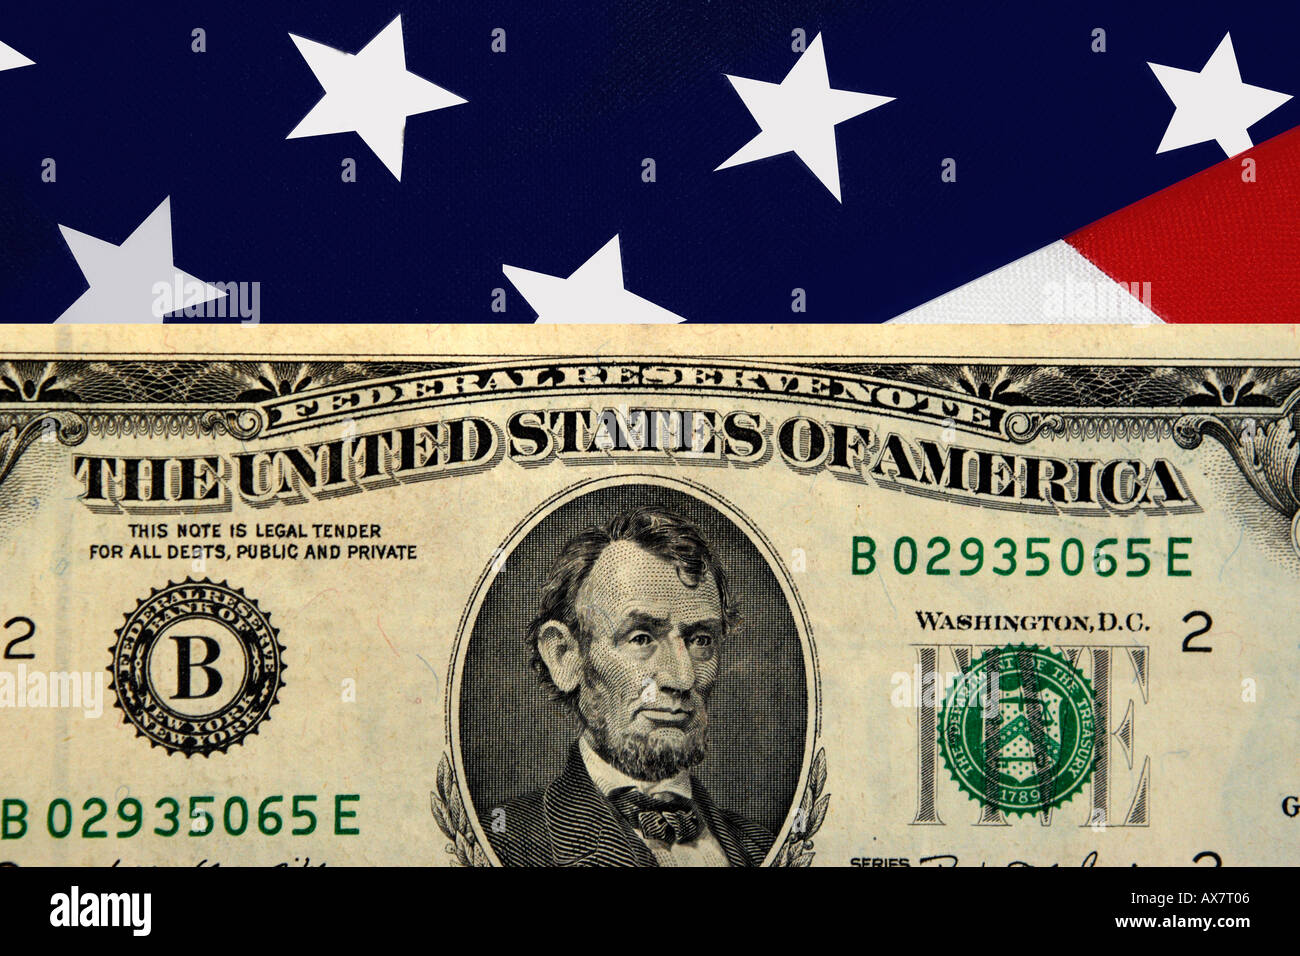 The front of an old style American Five Dollar bill set against a background of the Stars and Stripes flag. Stock Photo